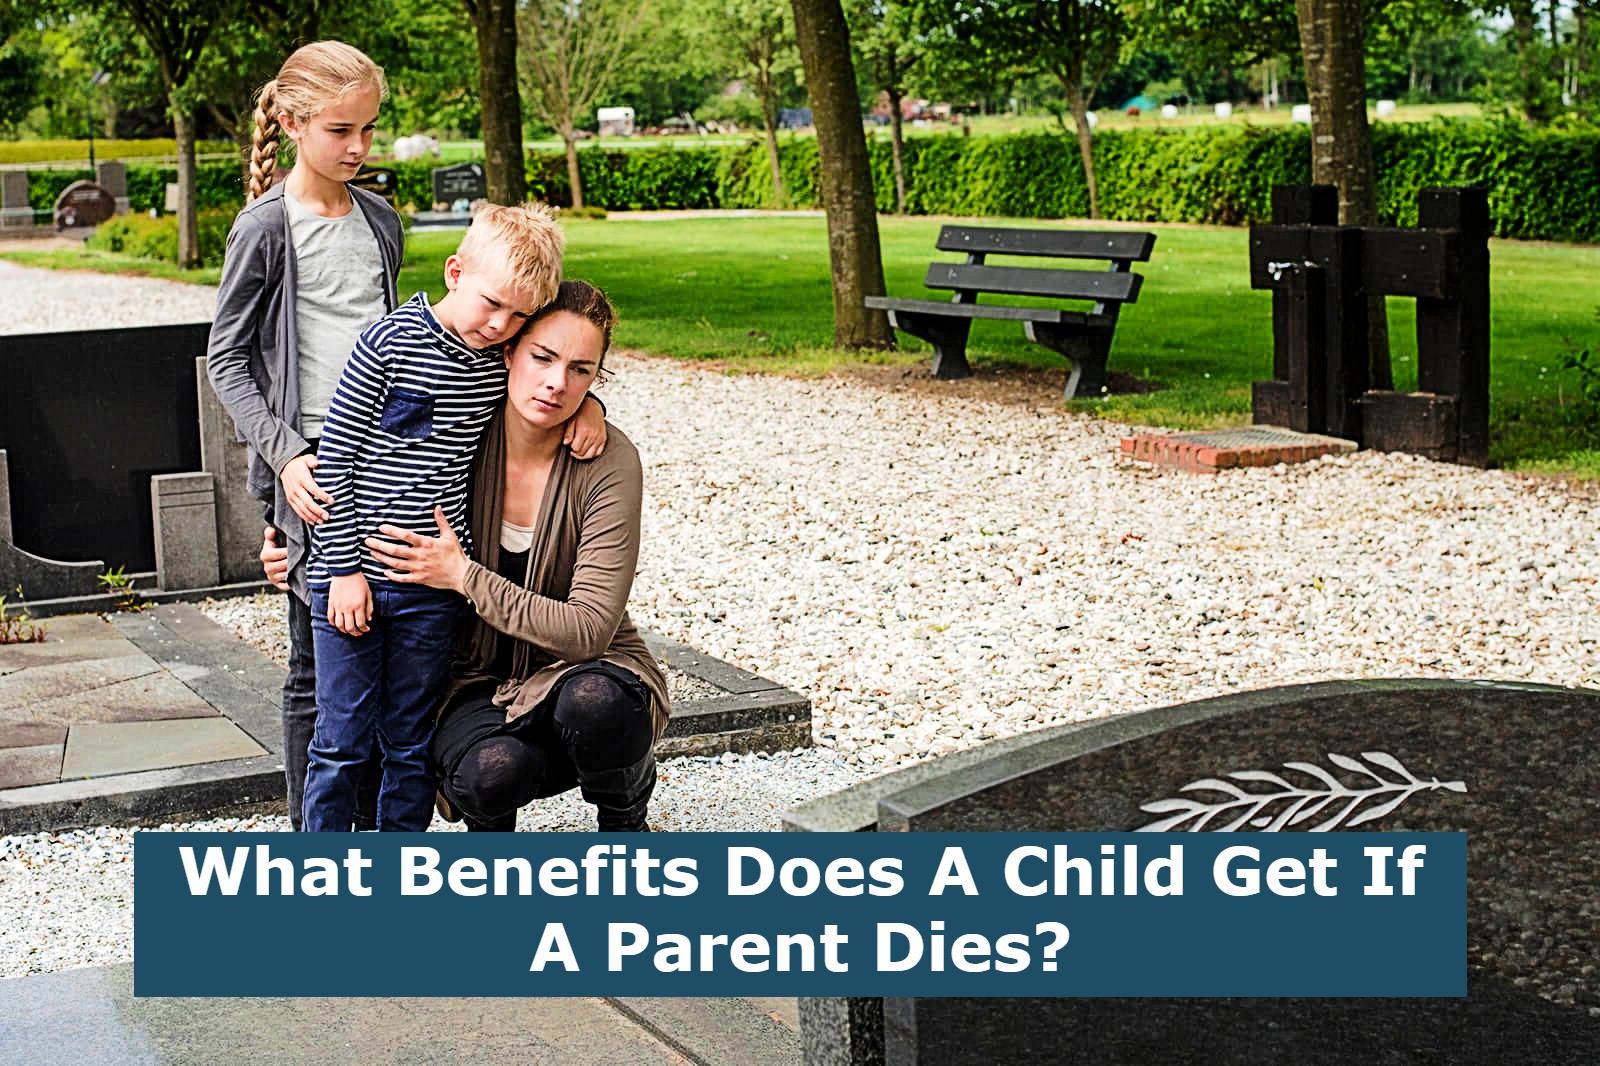 What Benefits Does A Child Get If A Parent Dies?